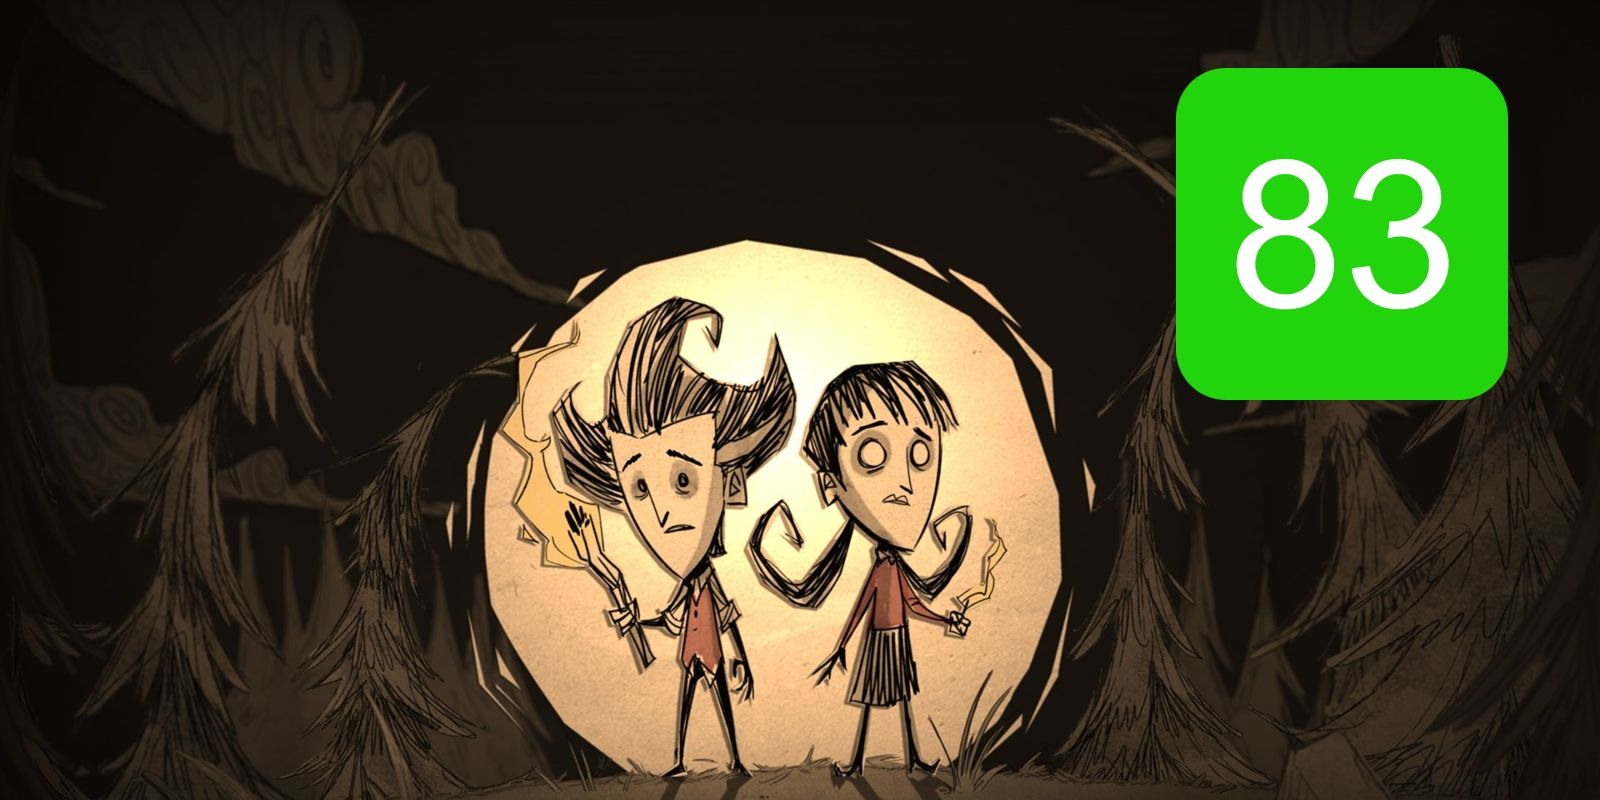 The PC Metascore for Don't Starve Together